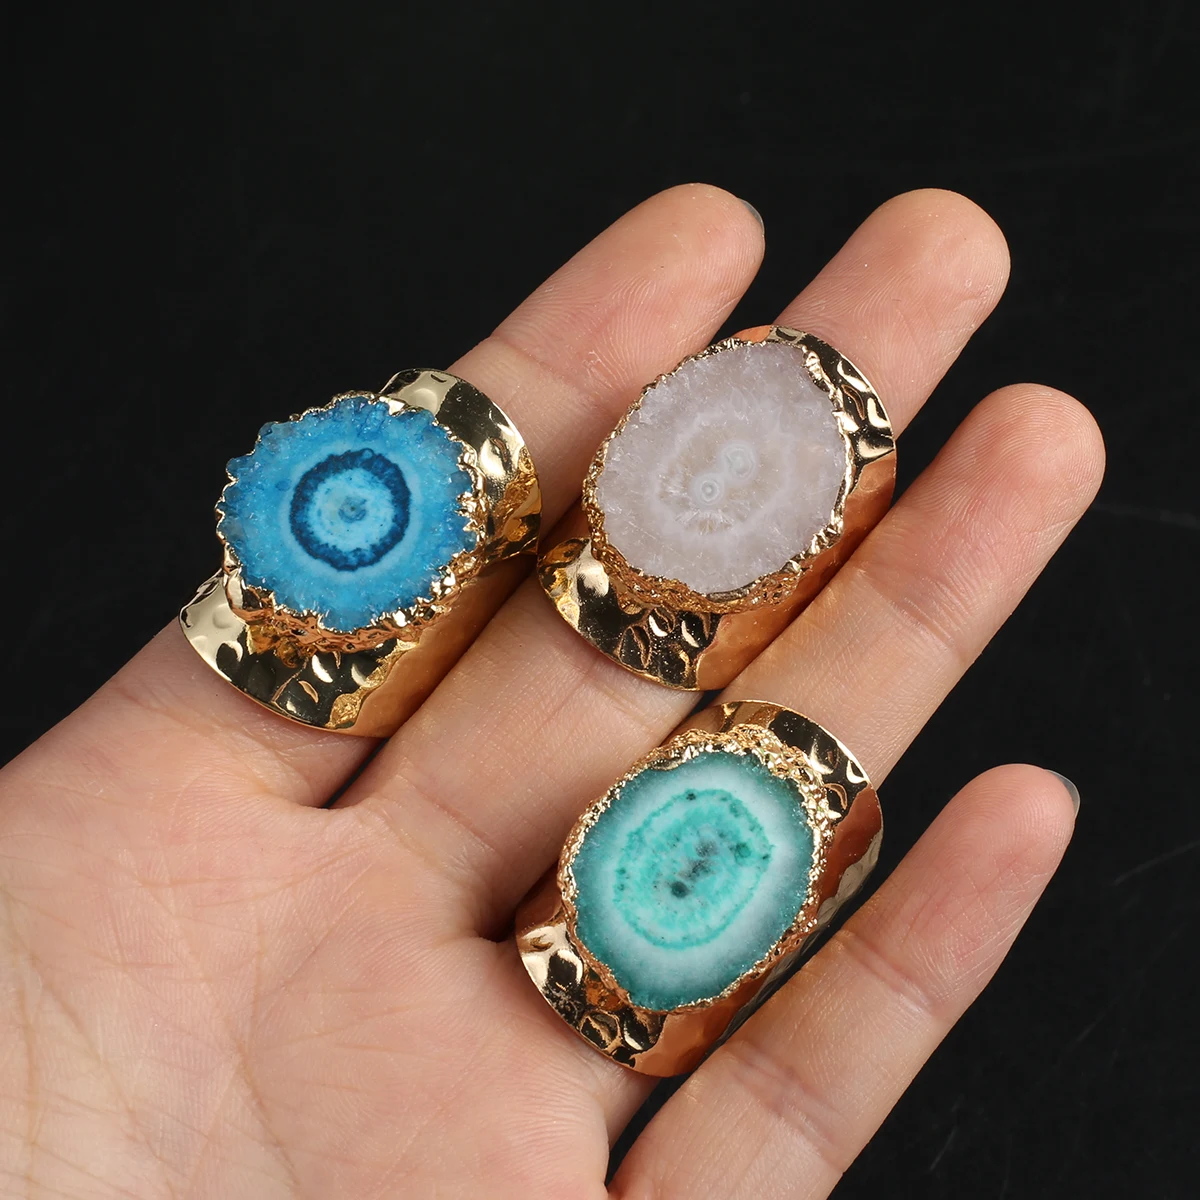 

4PCS Wholesale Price Natural Semi precious Stone Crystal Cluster Ring For Jewelry Valentine's Day Wedding Party Gift for women